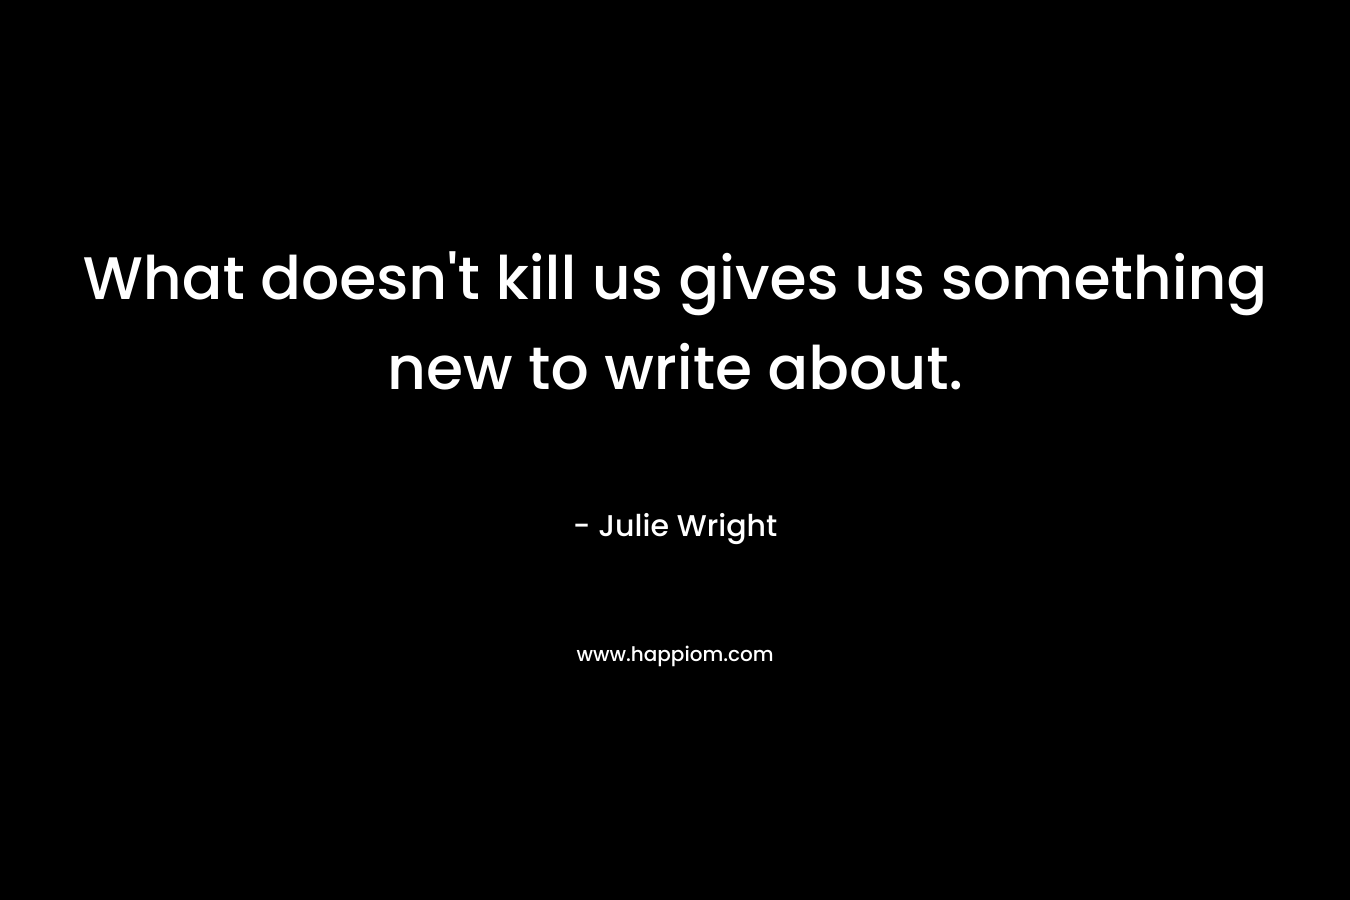 What doesn't kill us gives us something new to write about.